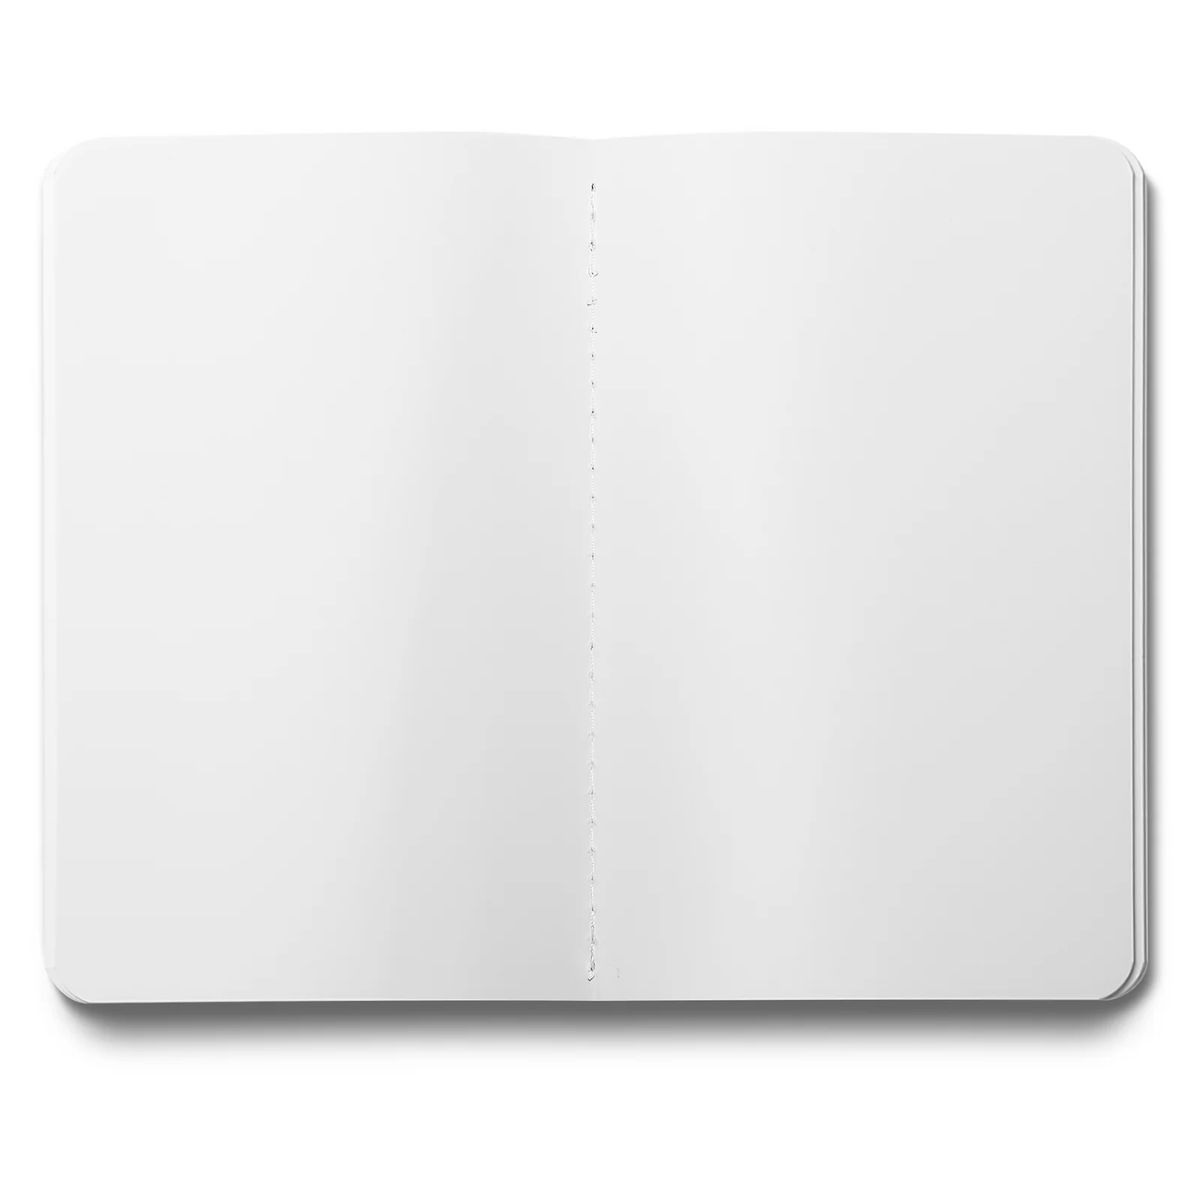 Plain Ash Softcover Pocket Journal (Twin-Pack)